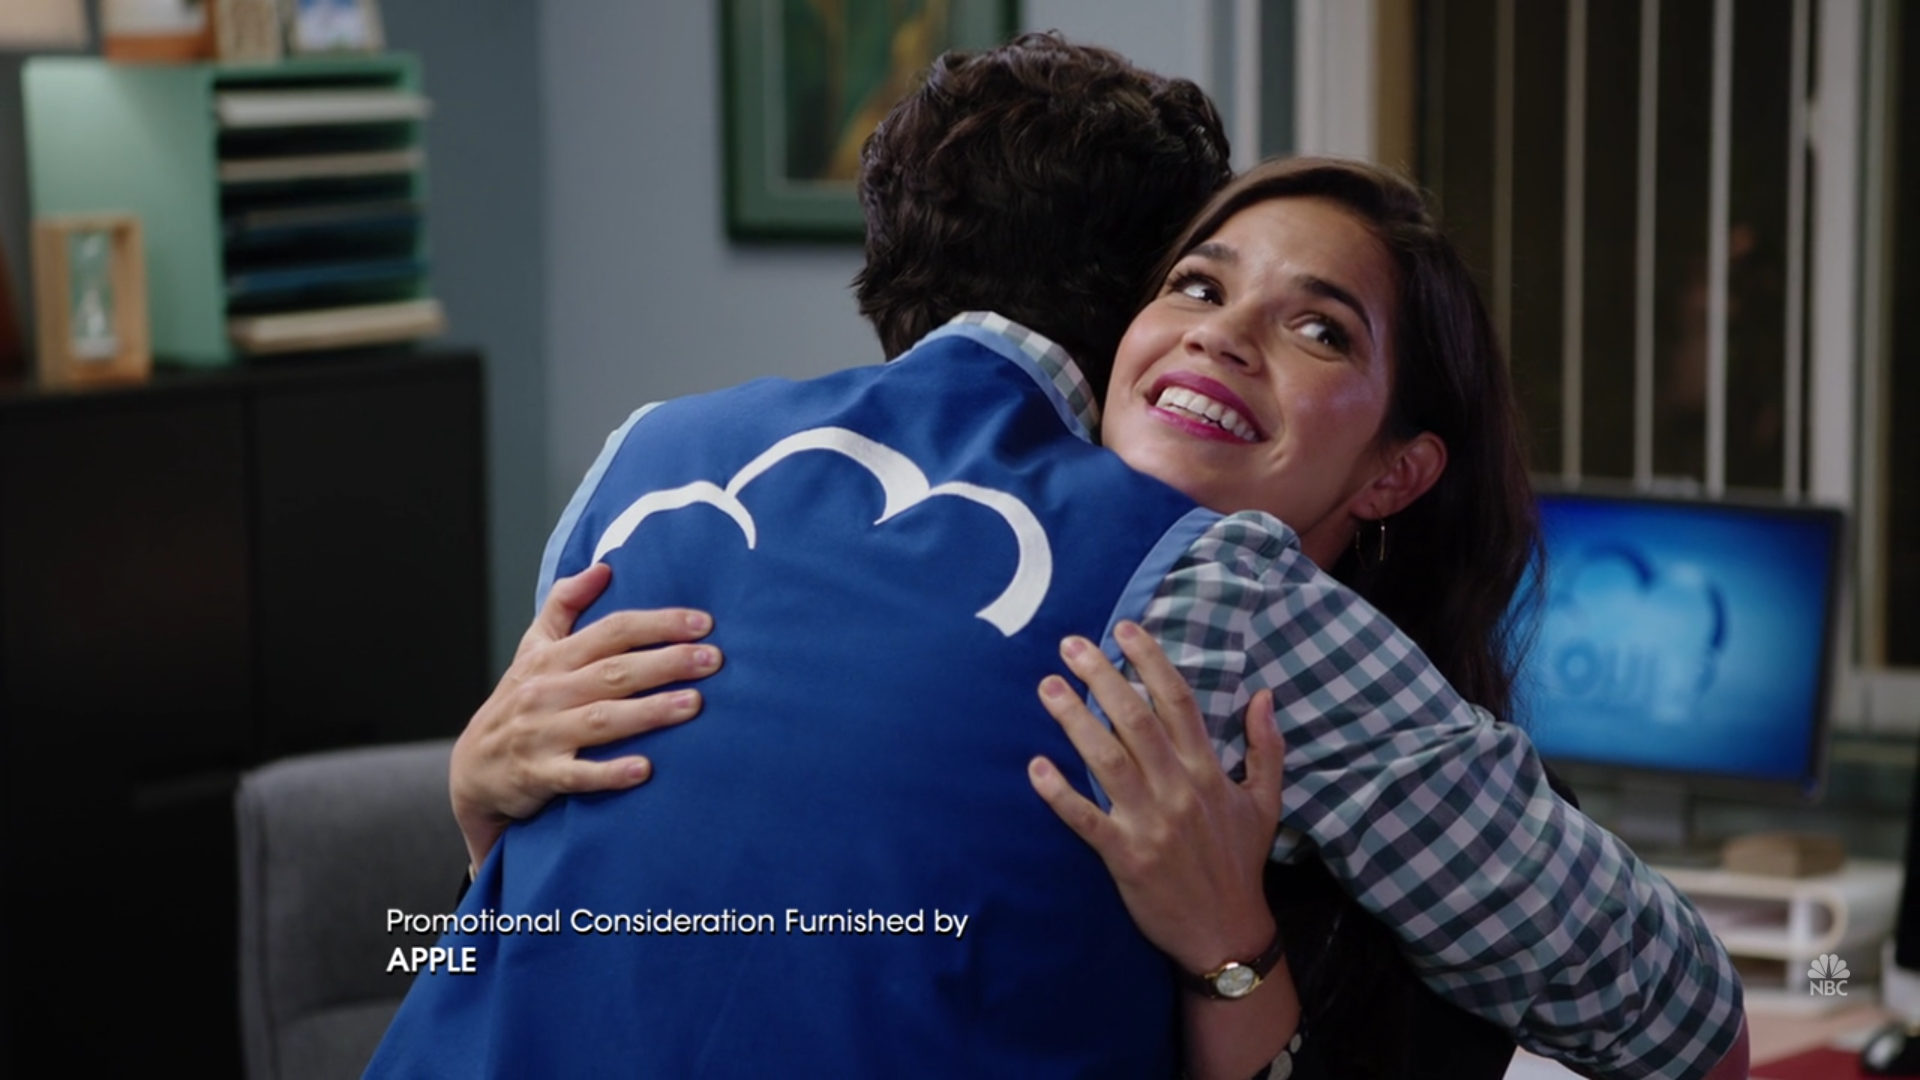 Superstore's' Jonah And Amy Are TV's Best 'Will They/Won't They